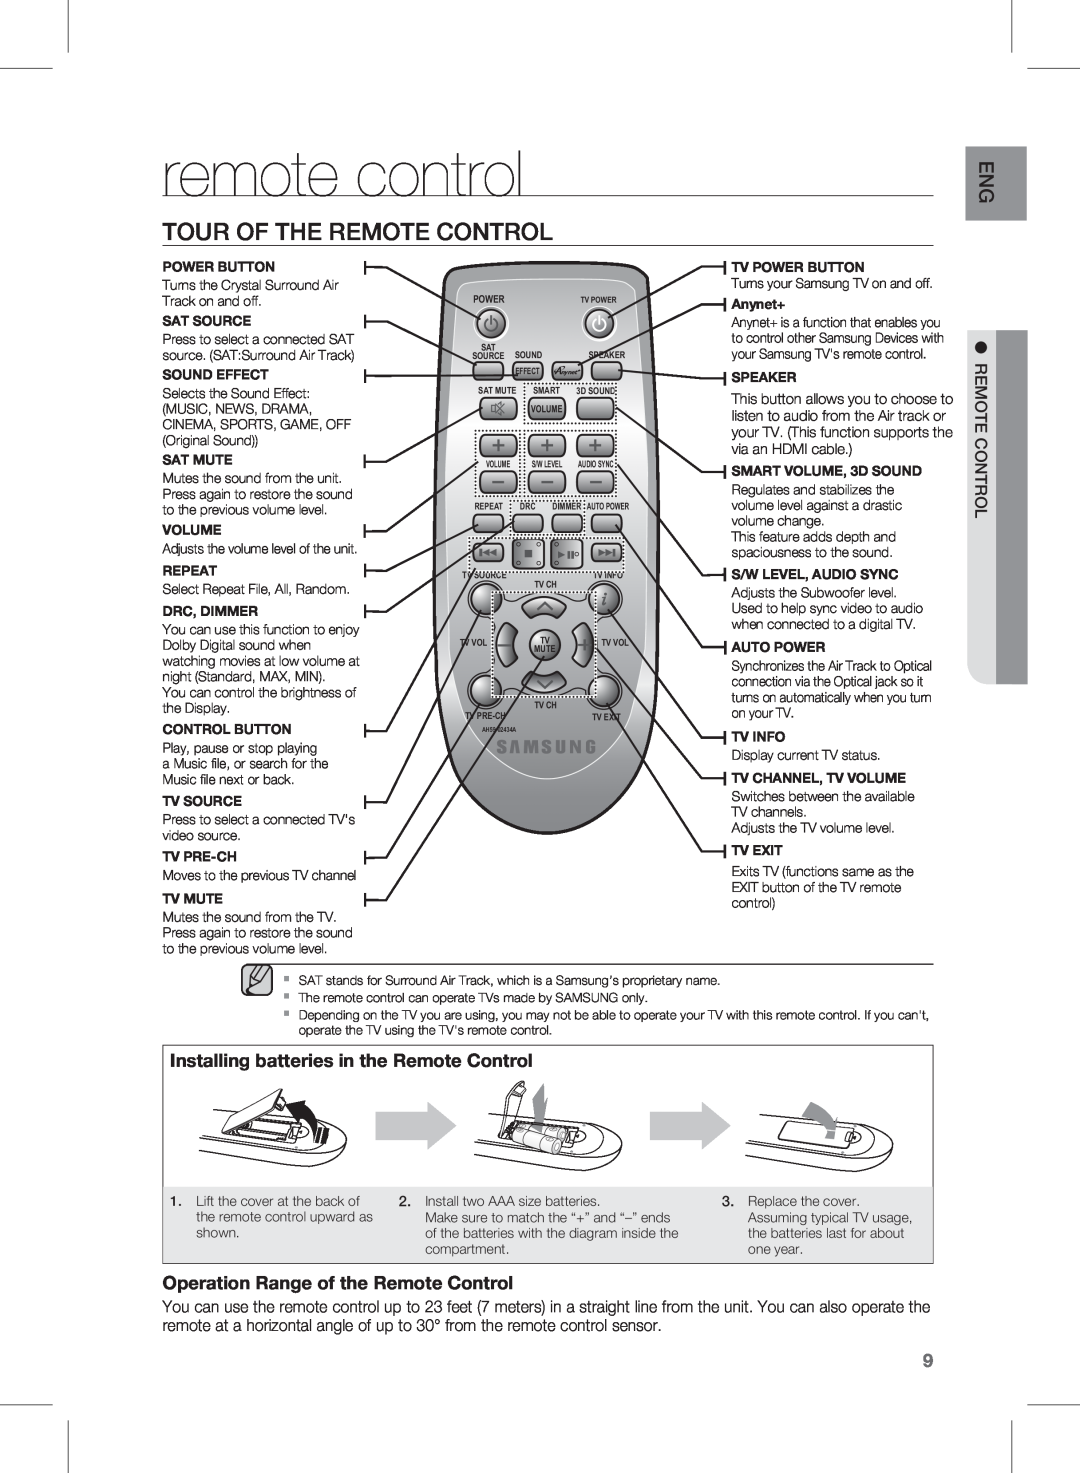 Samsung HW-E450 user manual remote control, Tour of the Remote Control, Installing batteries in the Remote Control 